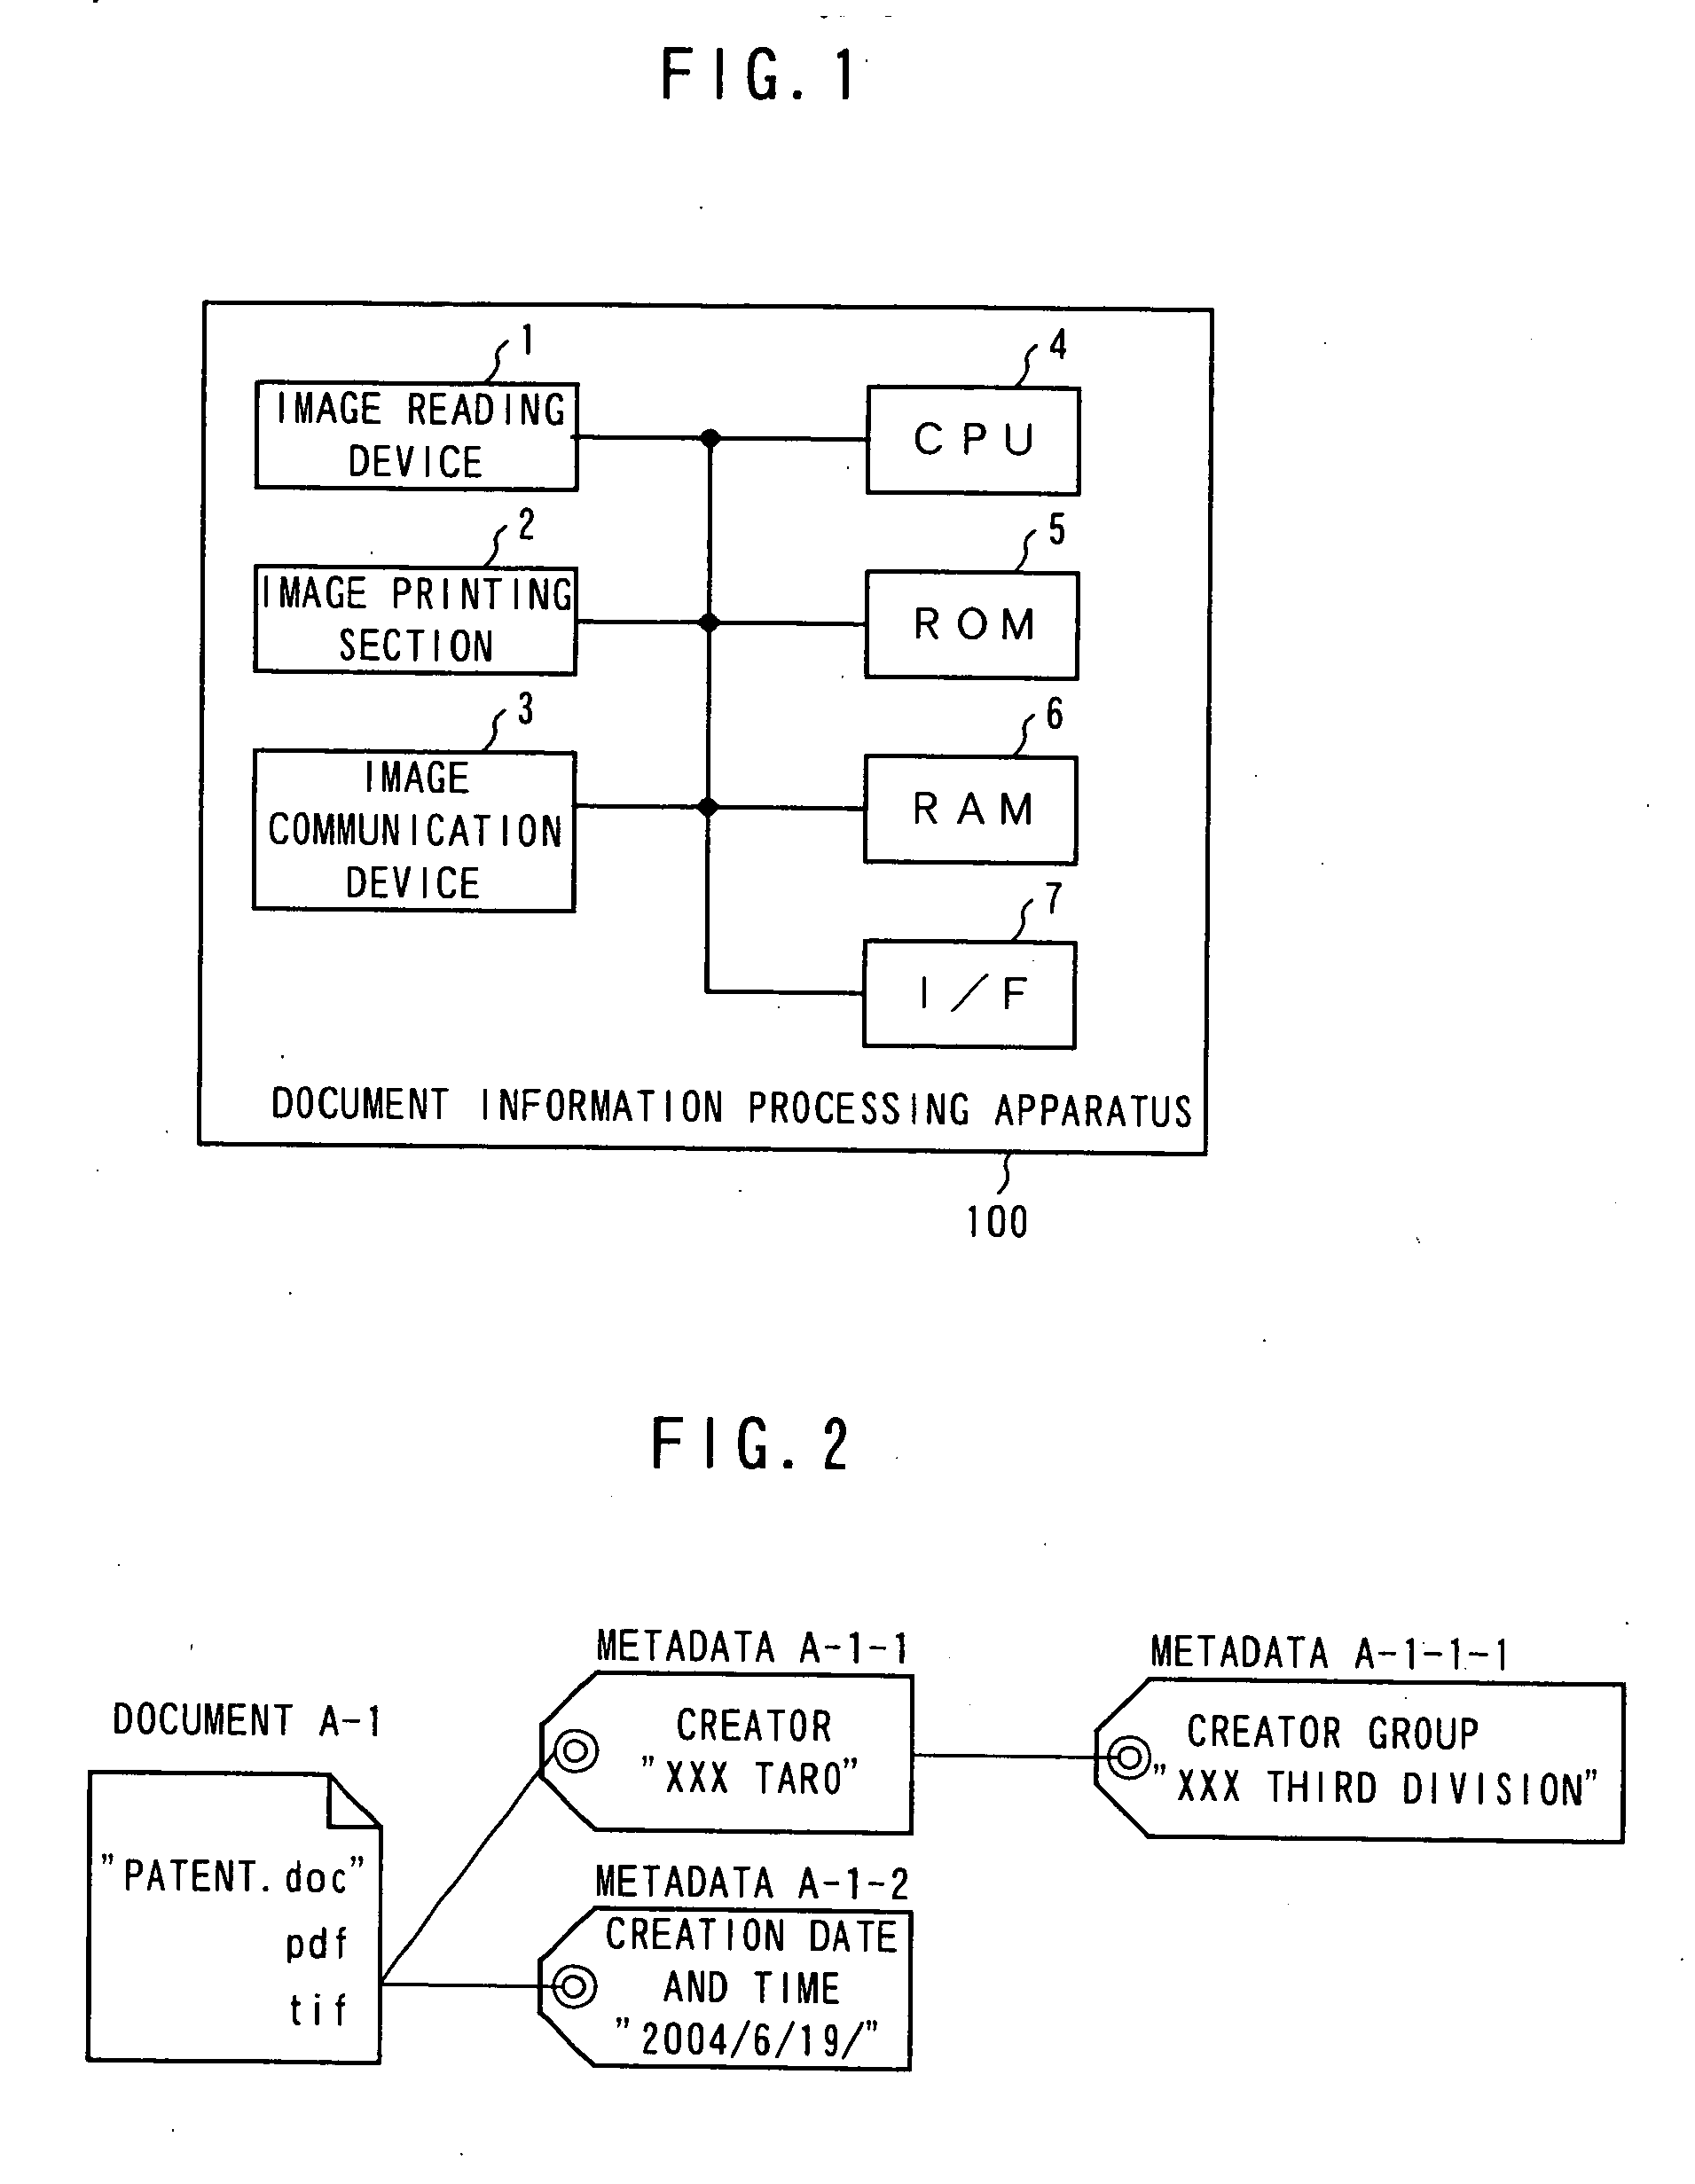 Document information processing apparatus and document information processing program